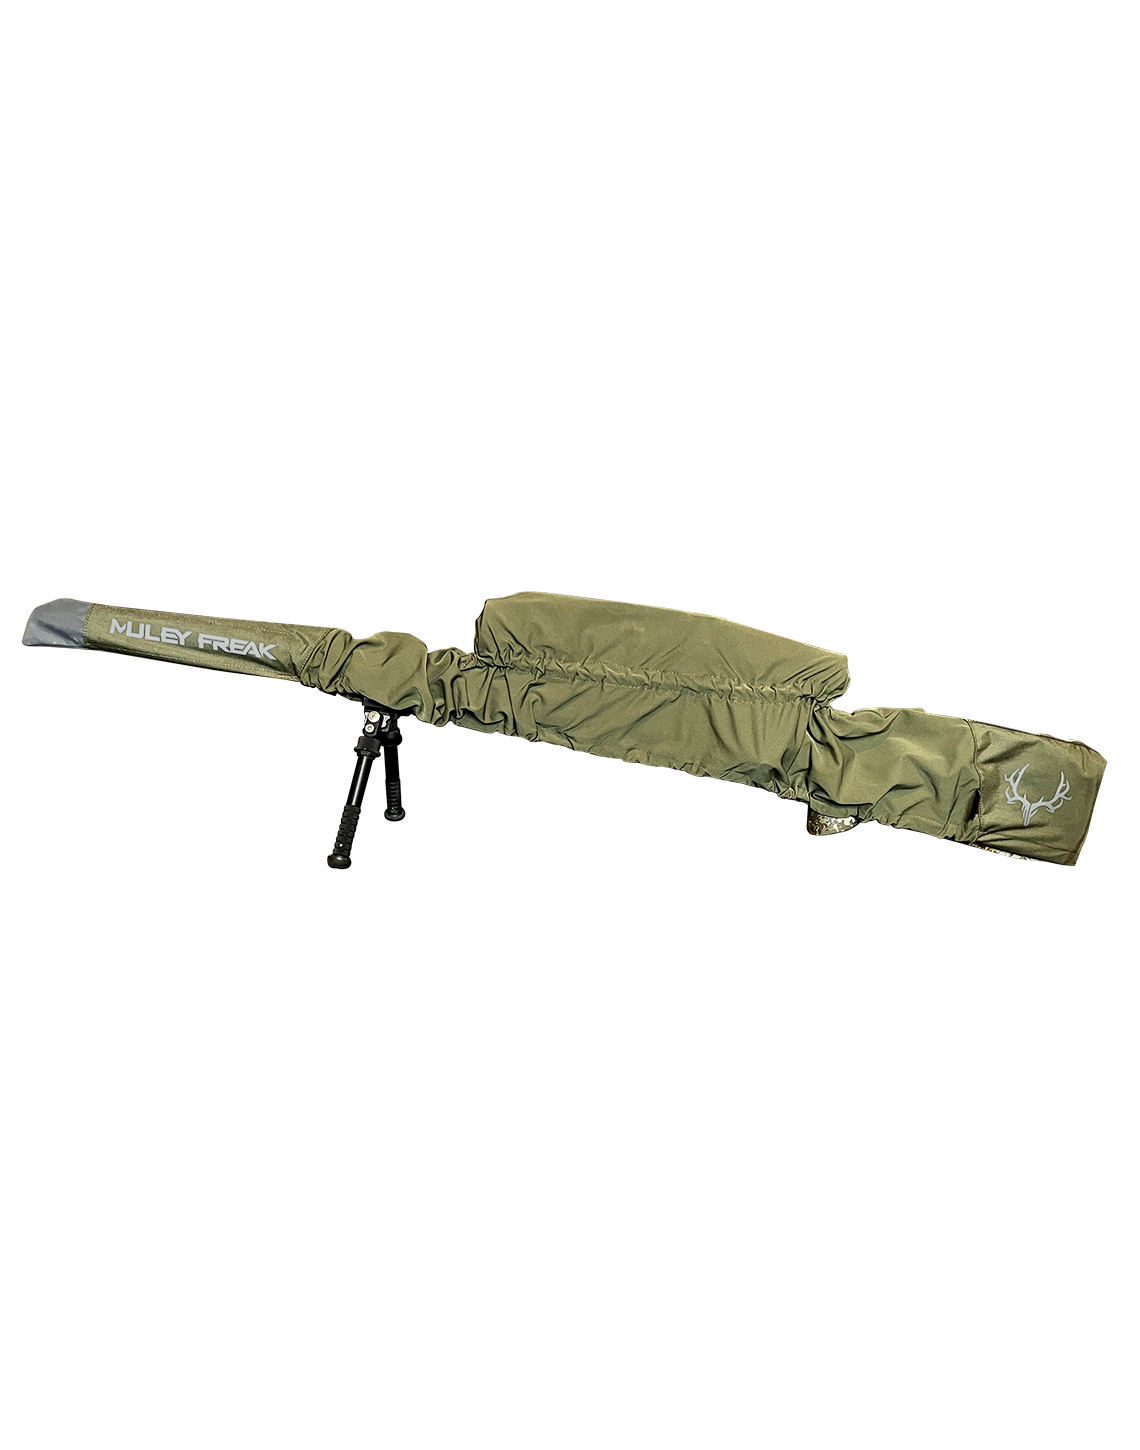 "Rifle cover with Pack-Konnect system by Muley Freak in Ranger Green for hunters.